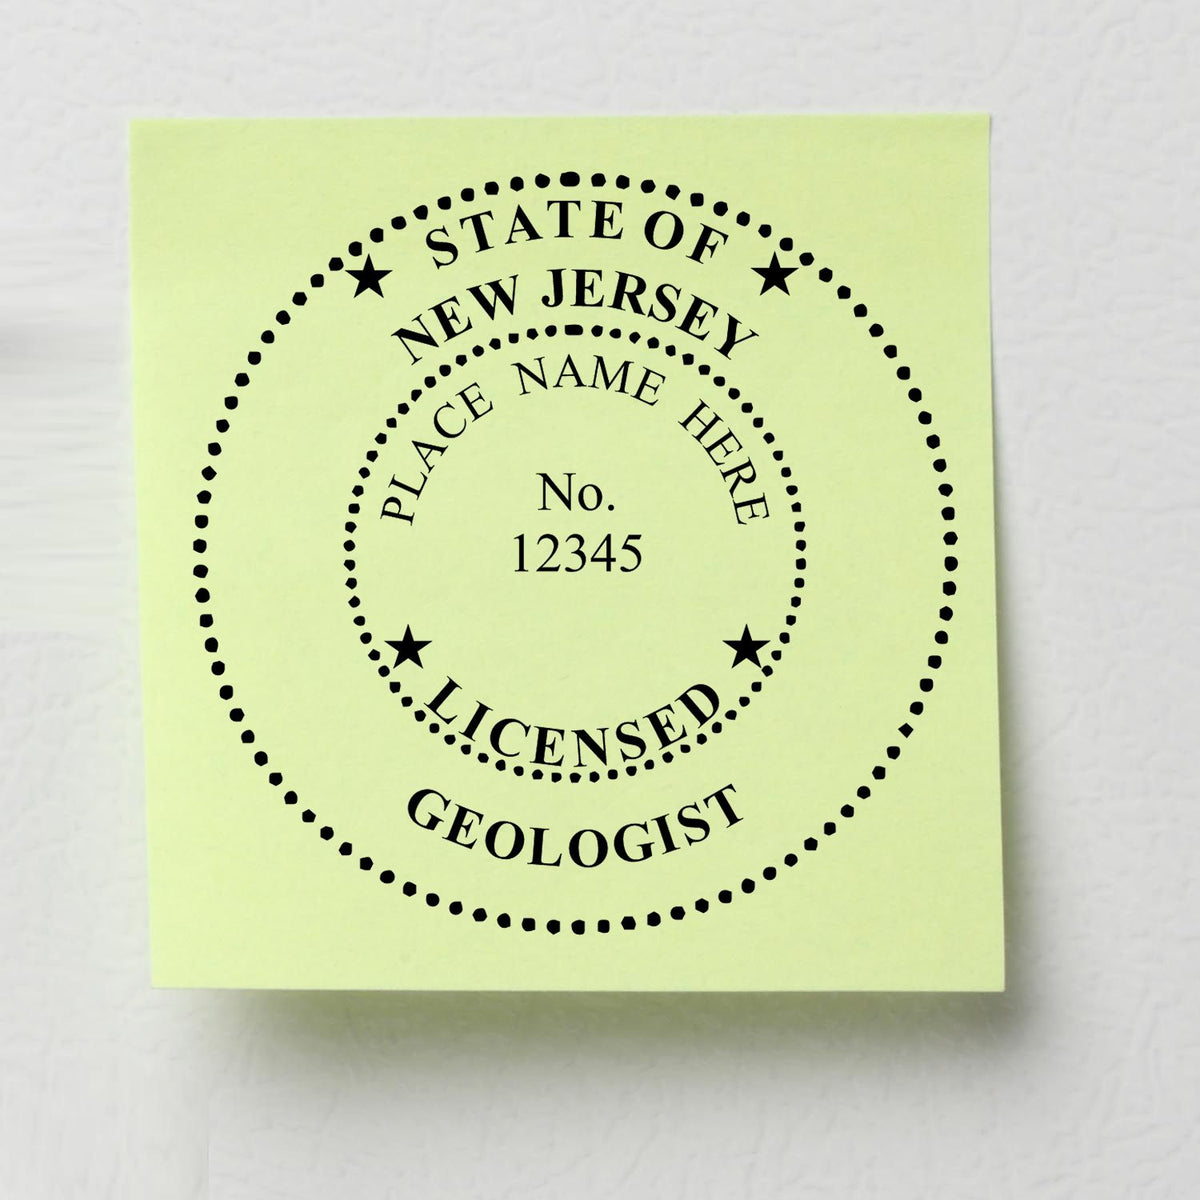 The New Jersey Professional Geologist Seal Stamp stamp impression comes to life with a crisp, detailed image stamped on paper - showcasing true professional quality.